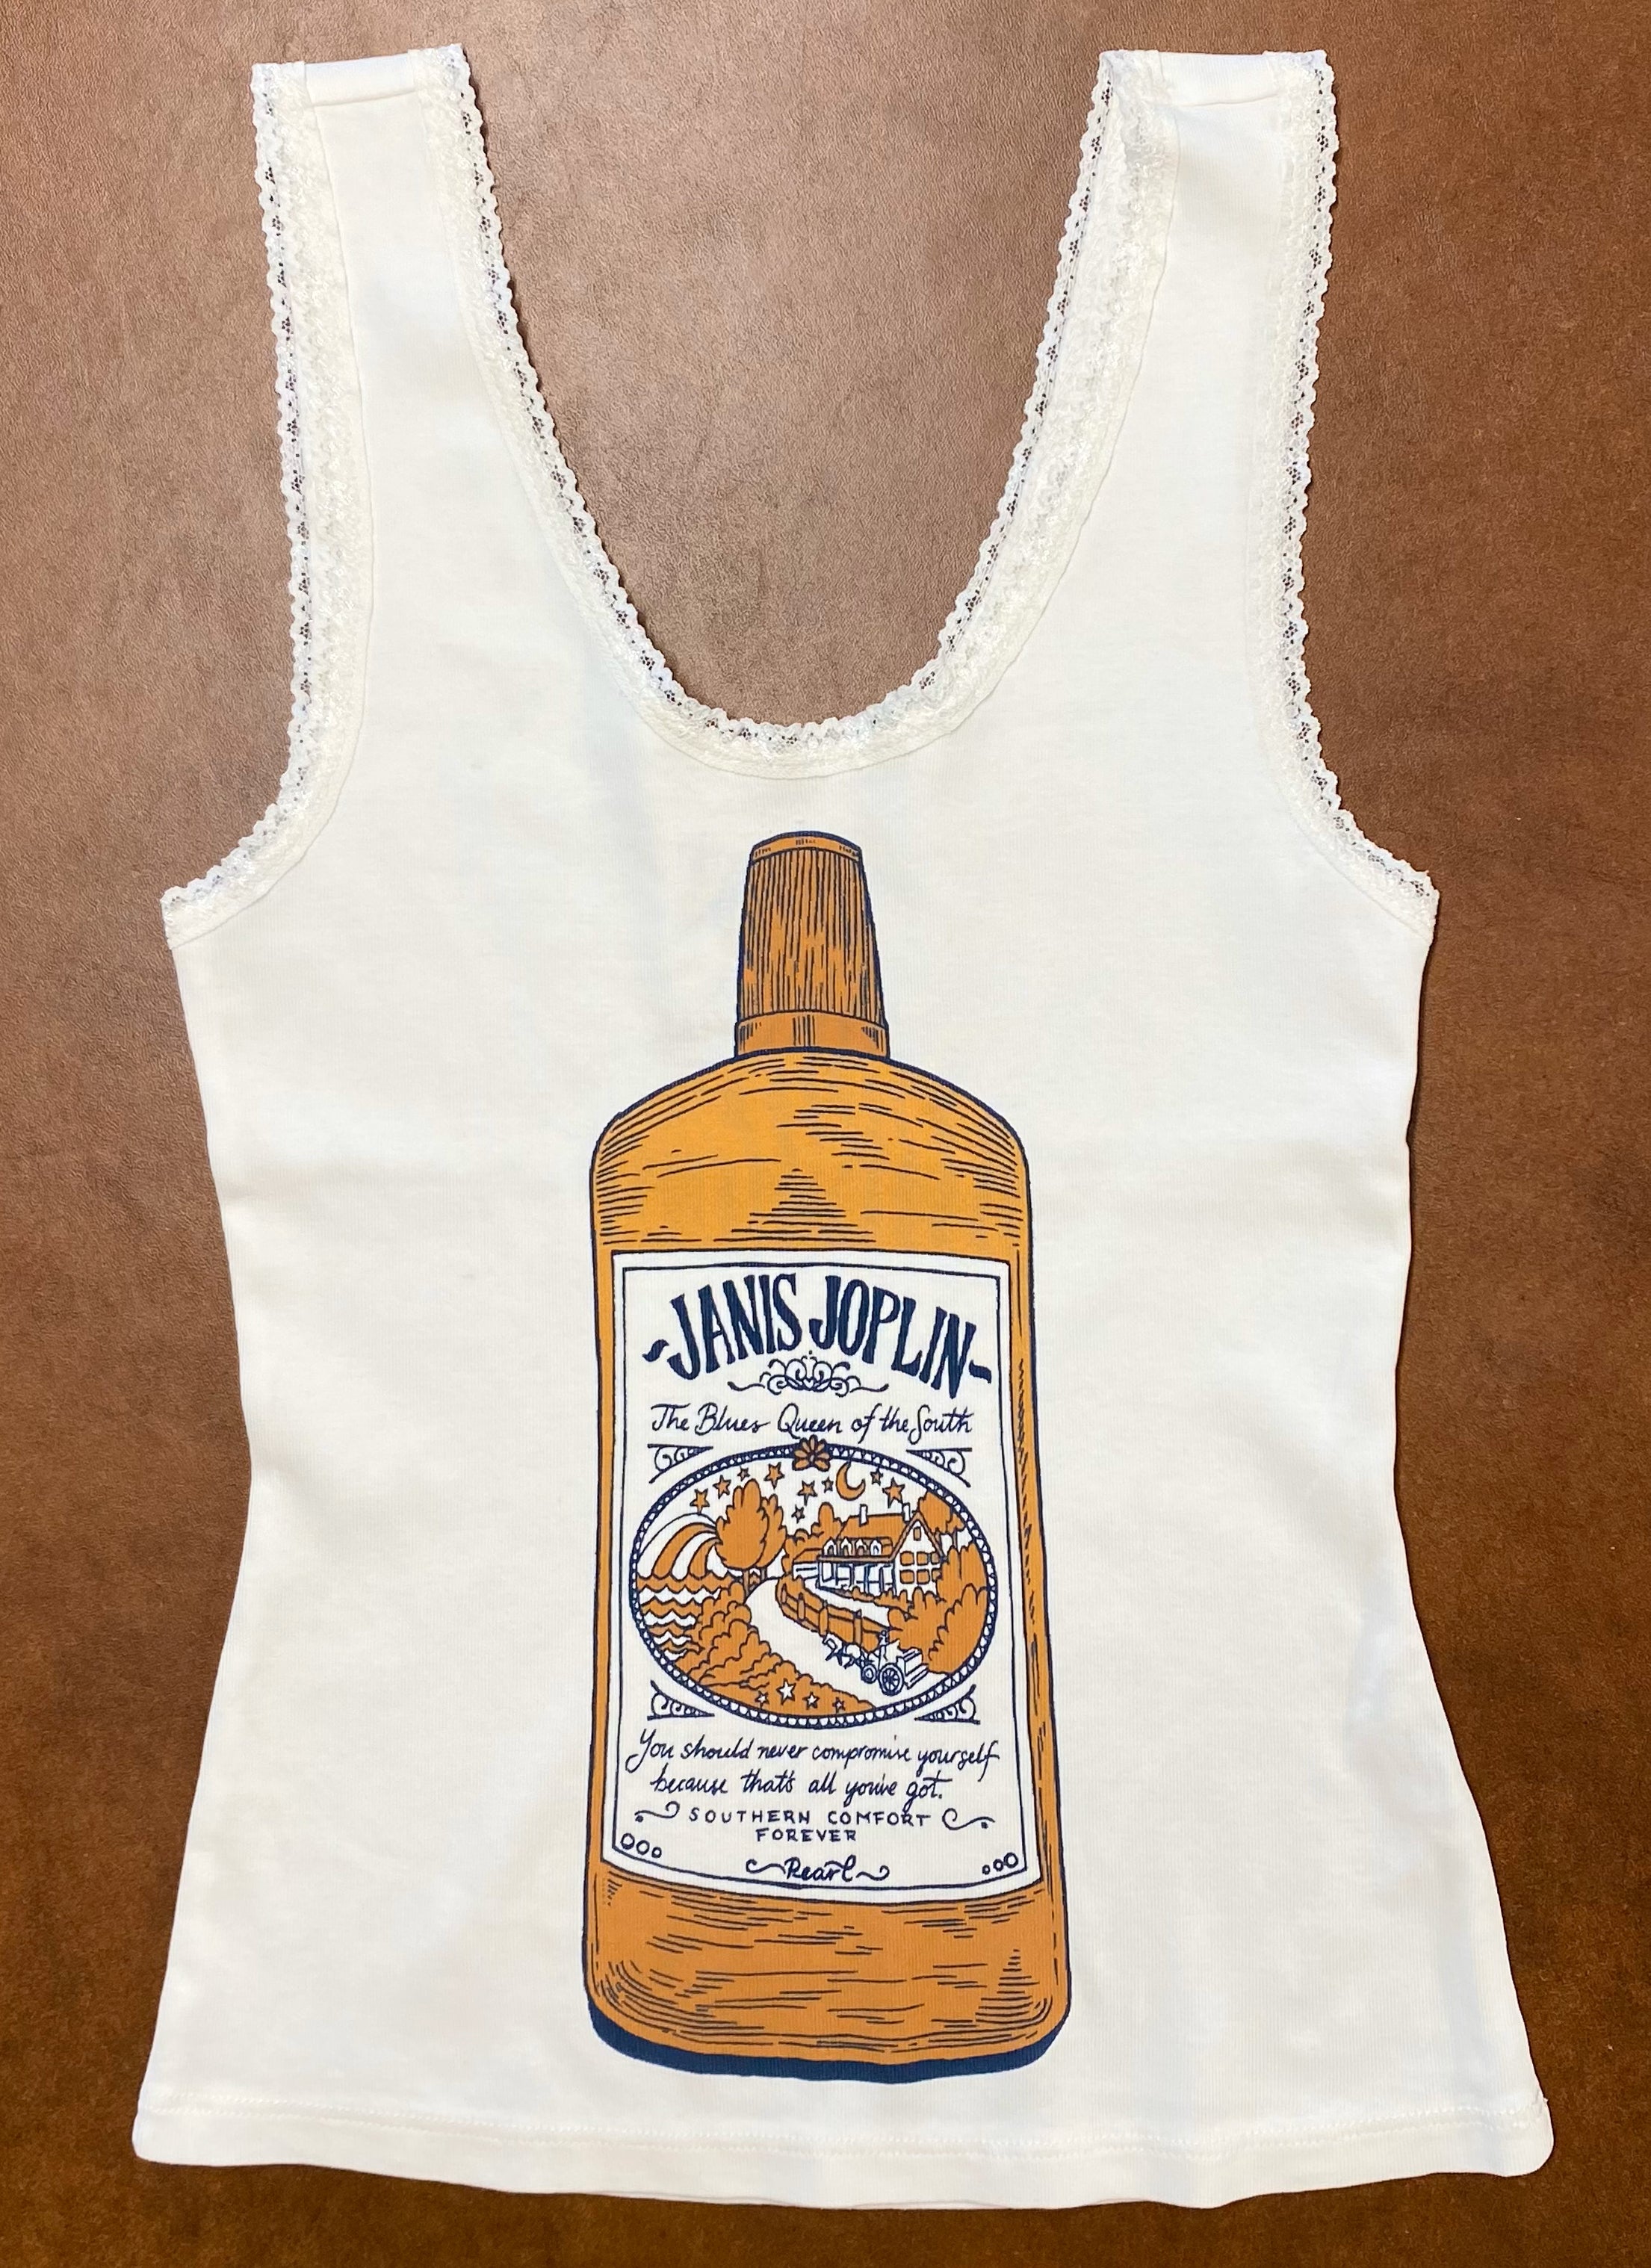 Janis Joplin The Blues Queen of the South Lace Tank